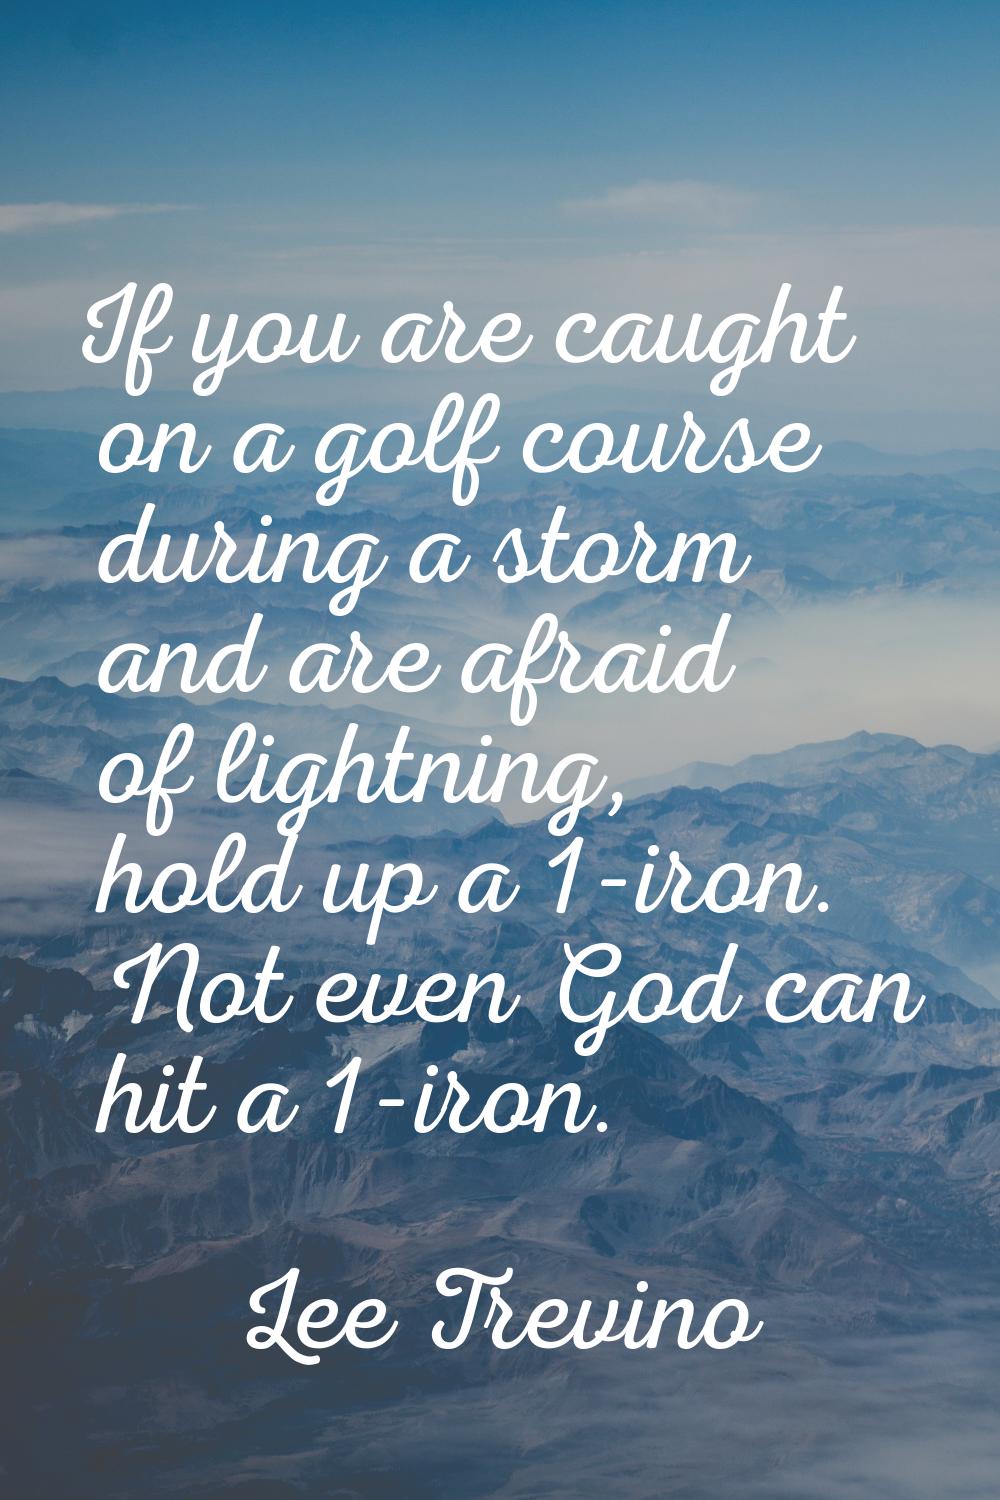 If you are caught on a golf course during a storm and are afraid of lightning, hold up a 1-iron. No